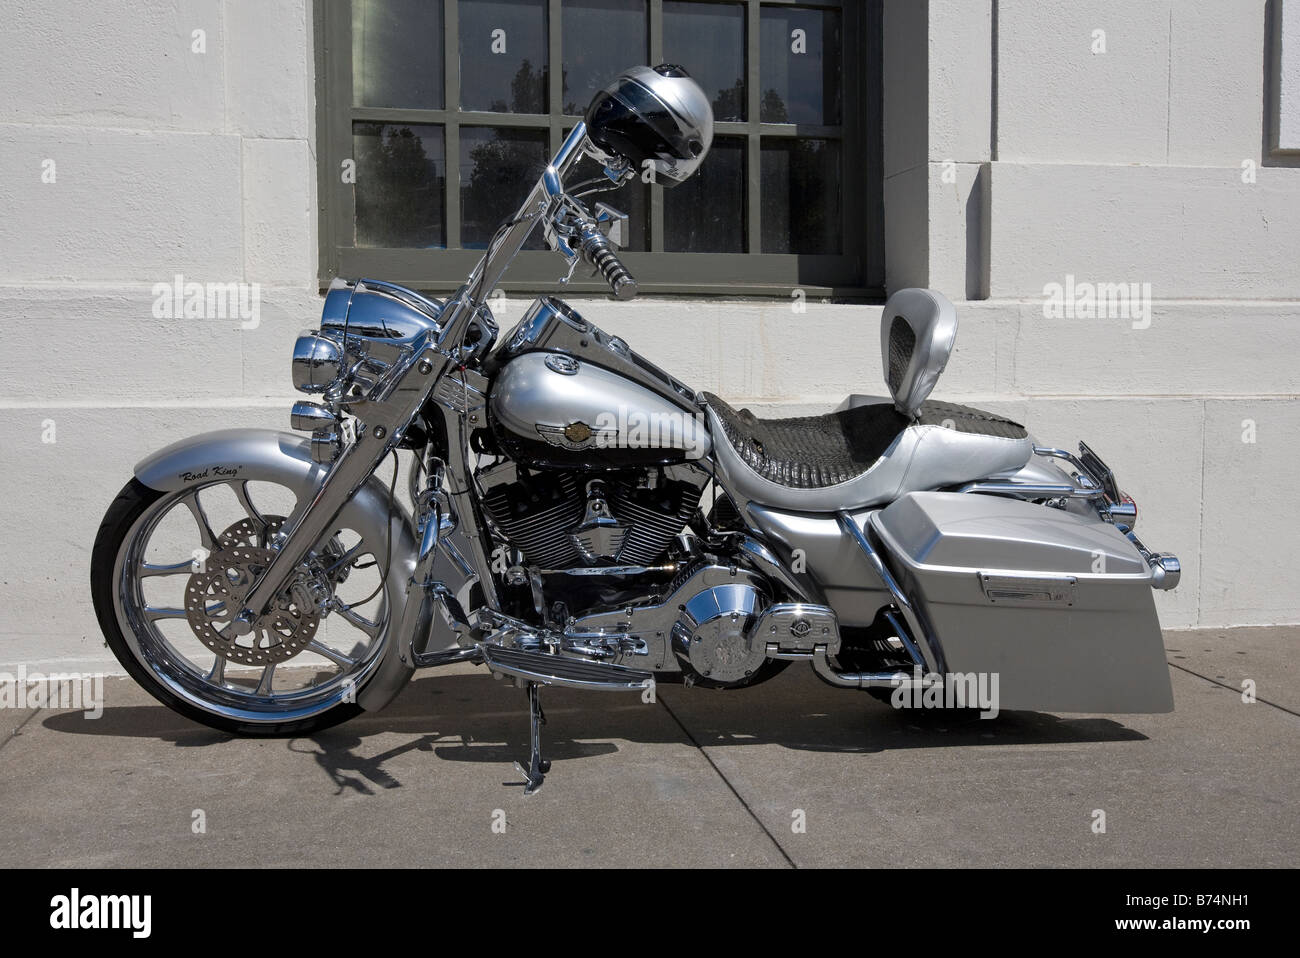 Harley Davidson FLHRC Road King Classic customized motorcycle Stock Photo